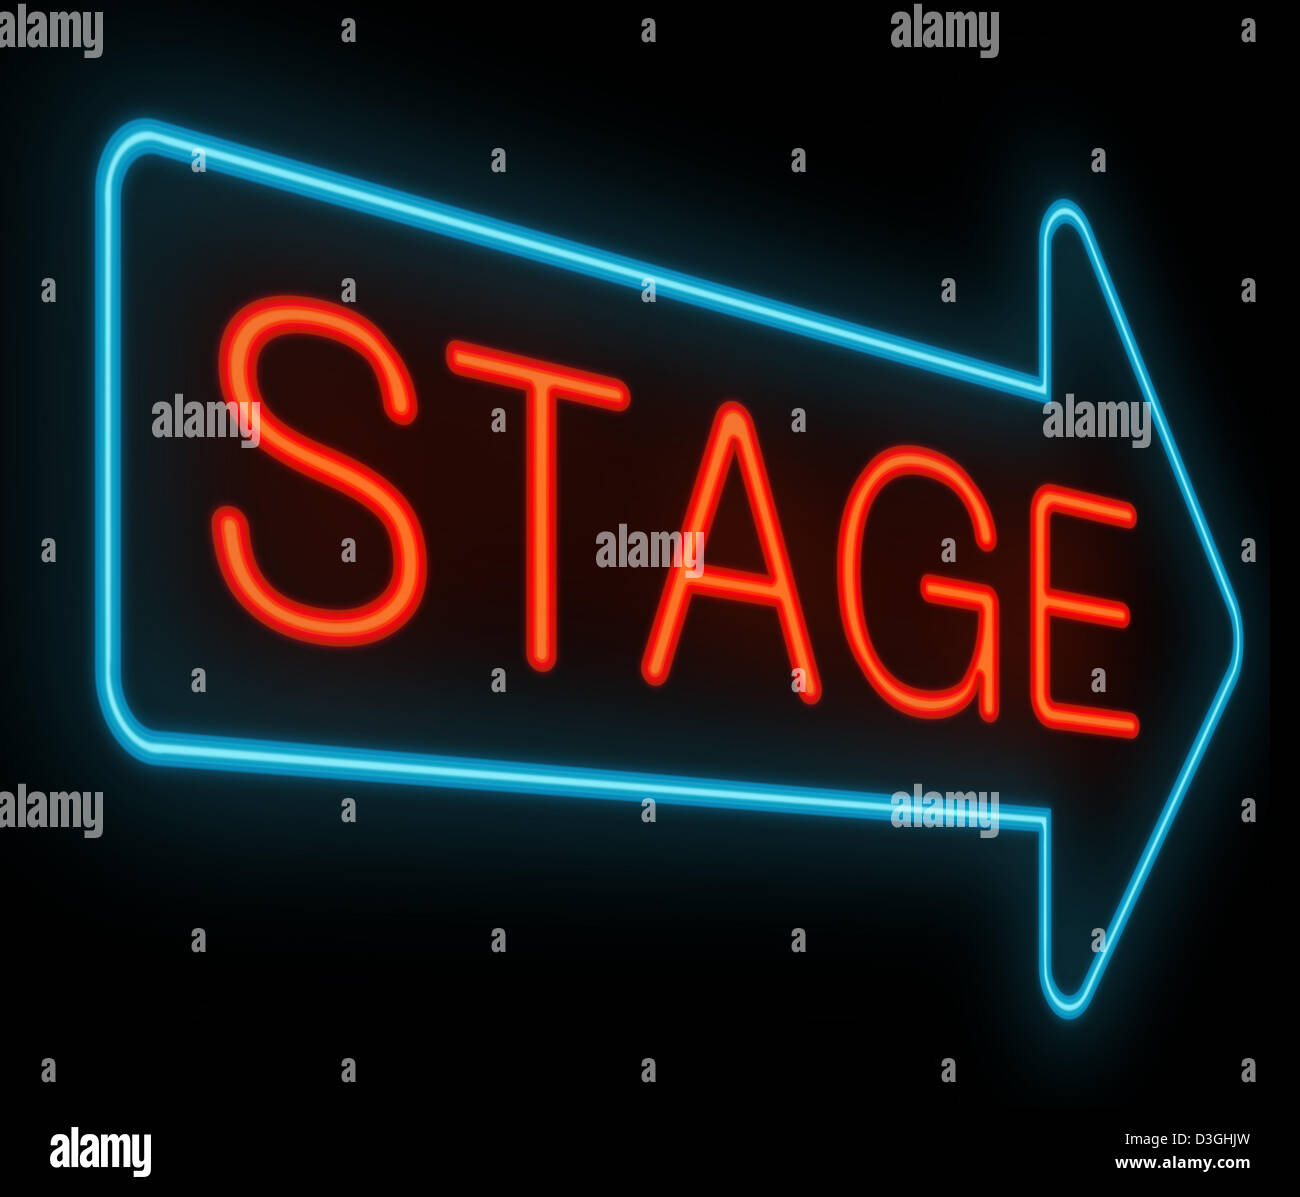 Stage sign. Stock Photo